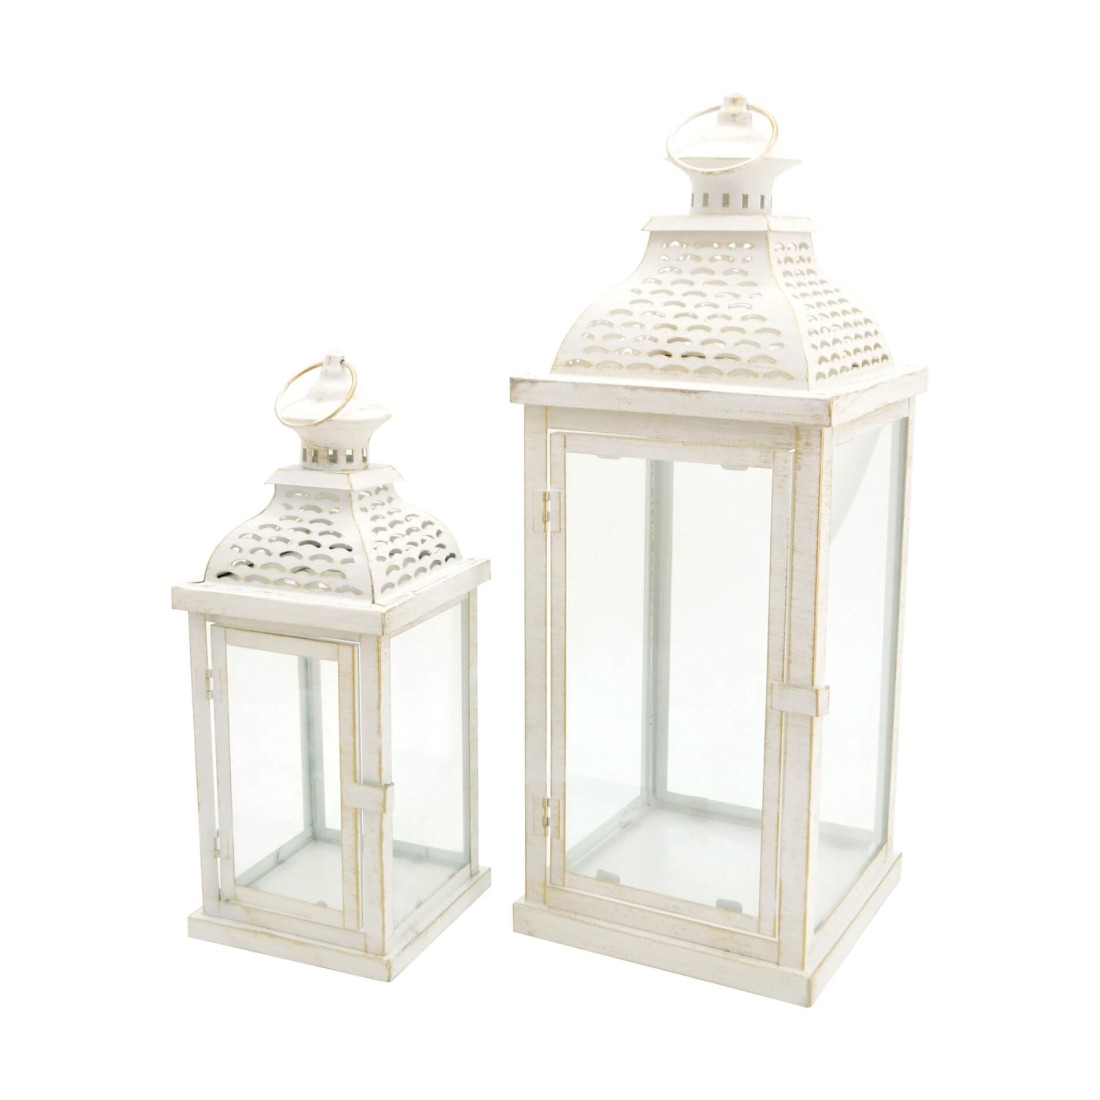 Set of 2 floor lanterns for the home or balcony